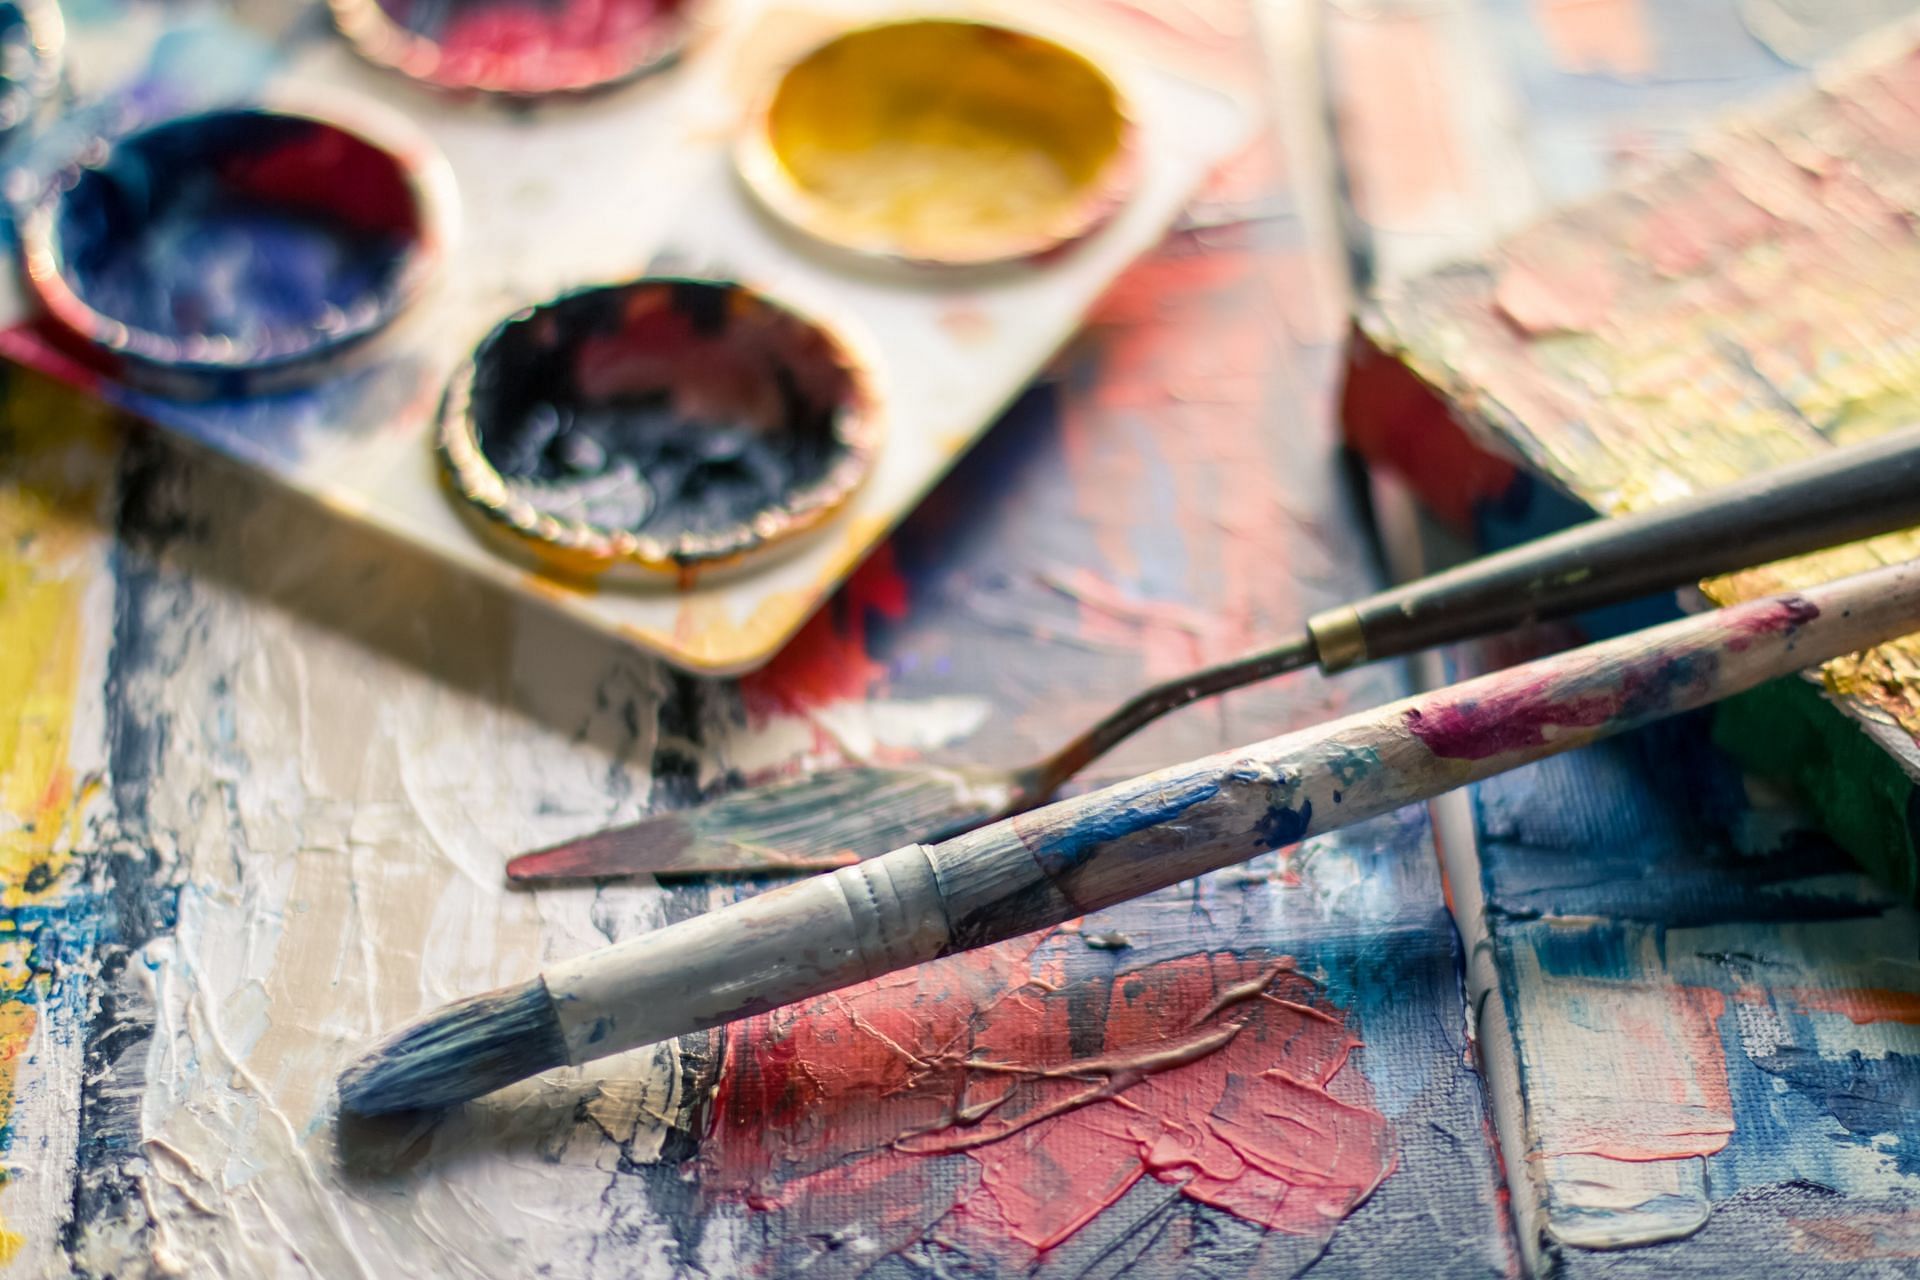 Till you don't try, you won't know what your hobby is. (Image via Pexels/Steve Johnson)